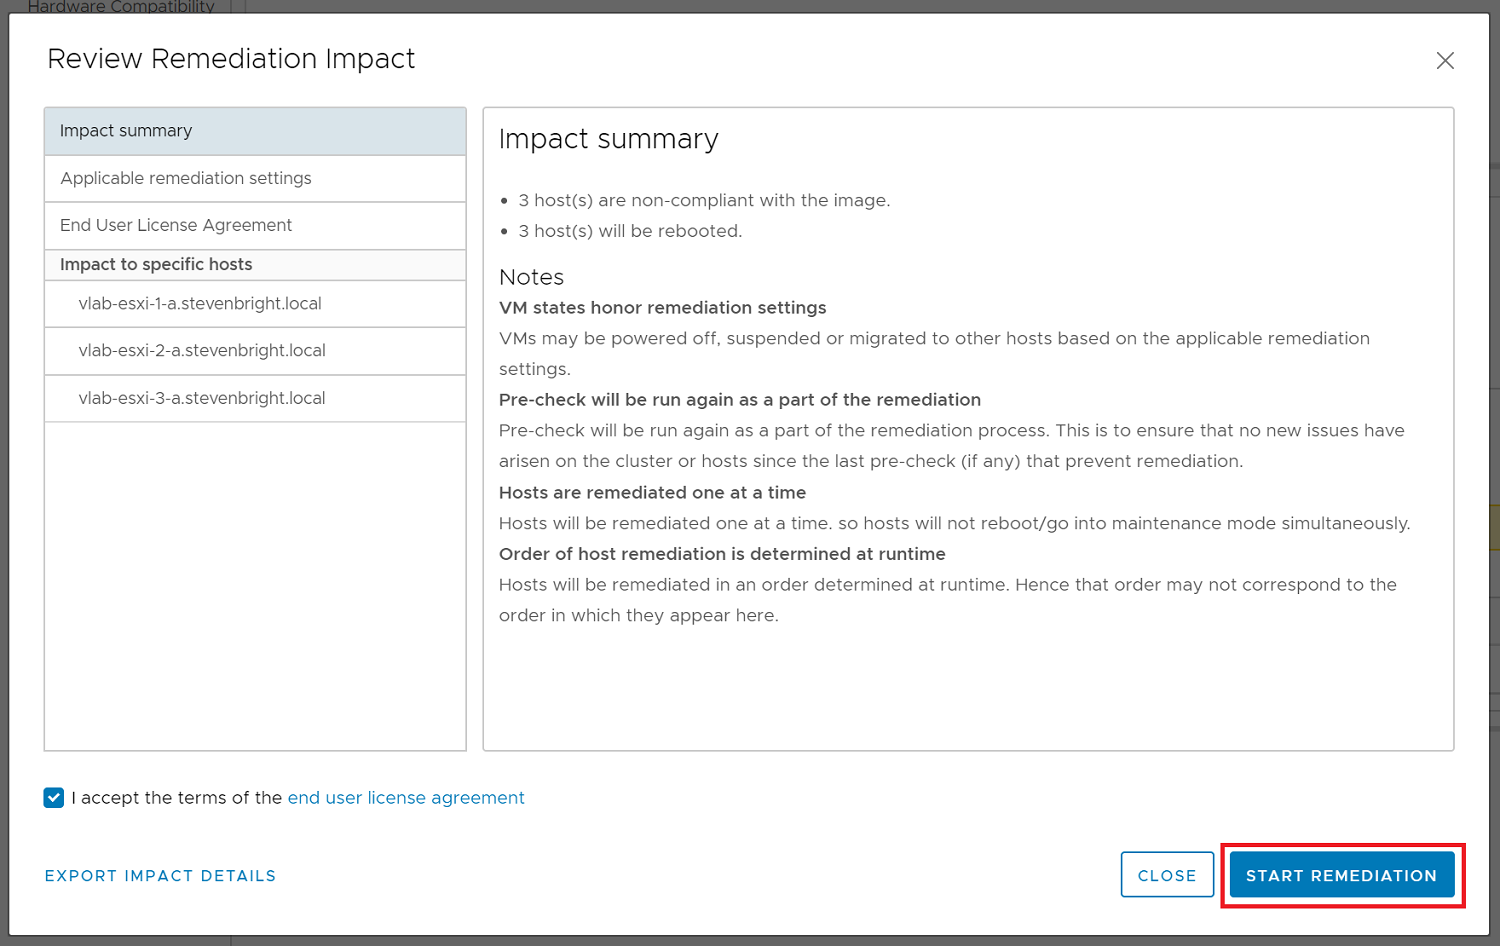 Enable vSphere Lifecycle Manager Image Management - Review Remediation Impact Dialog